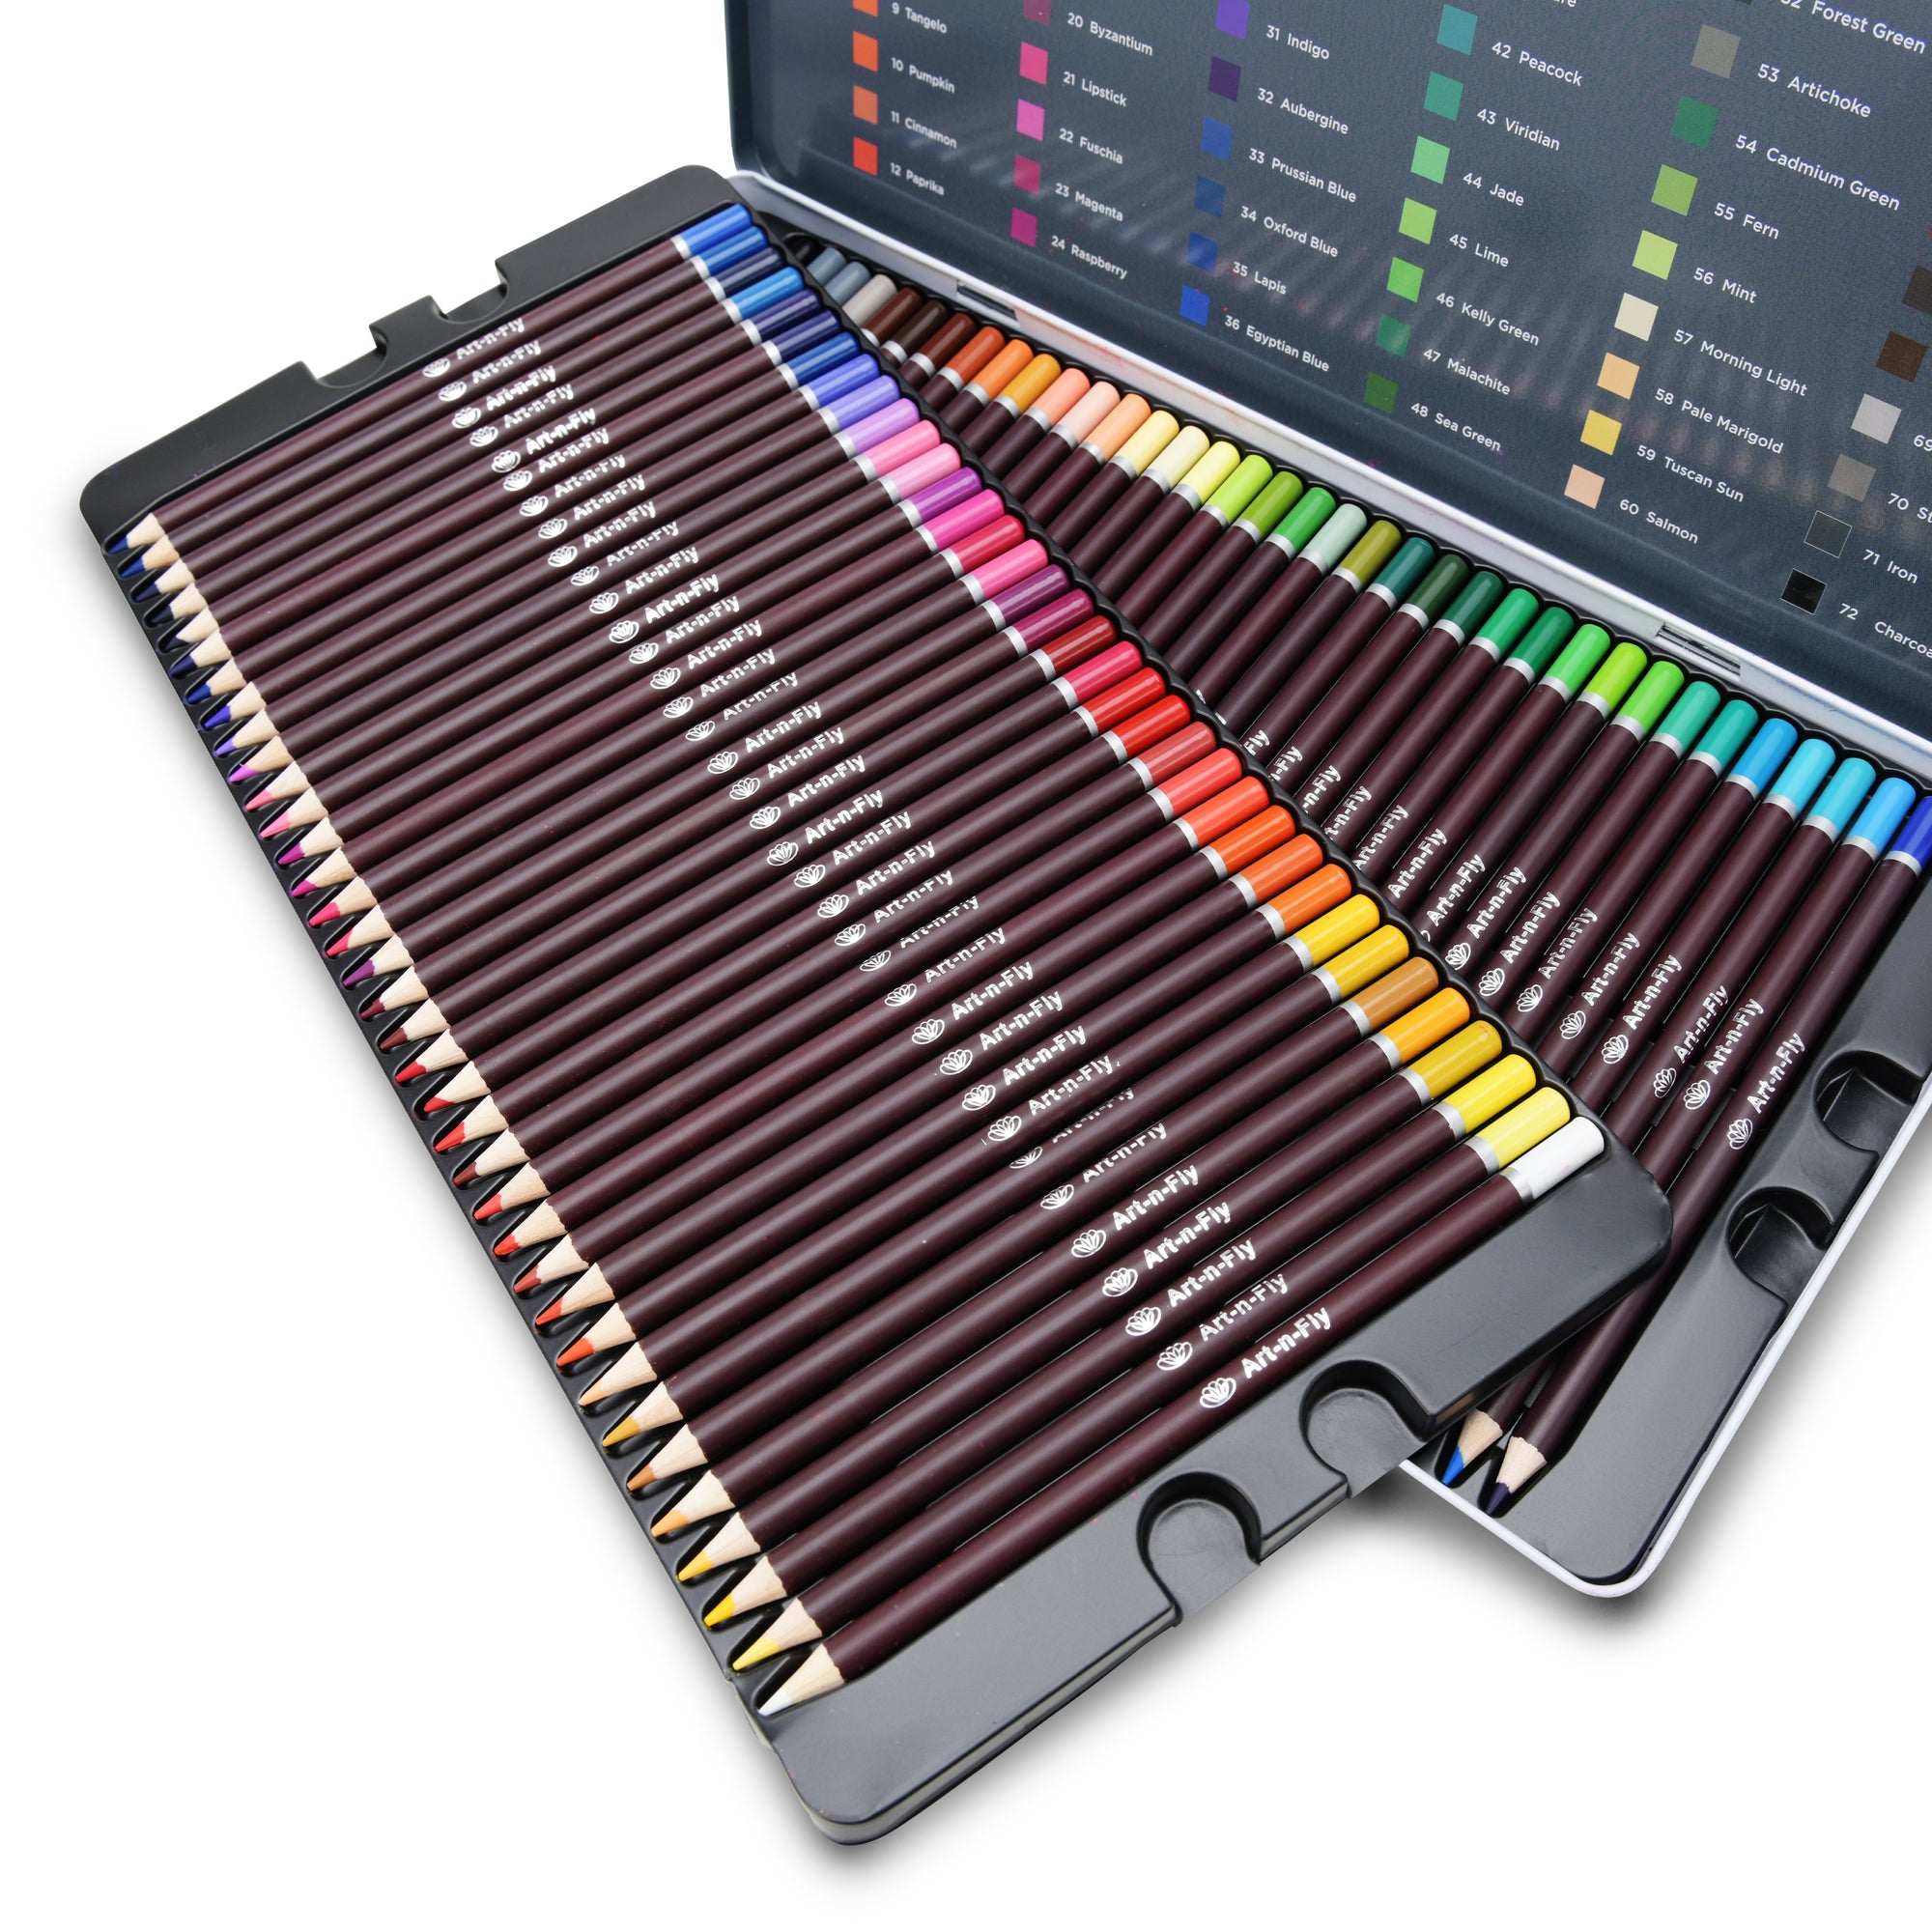 72 Colored Pencils for Artists Professional Coloring Pencil Colors